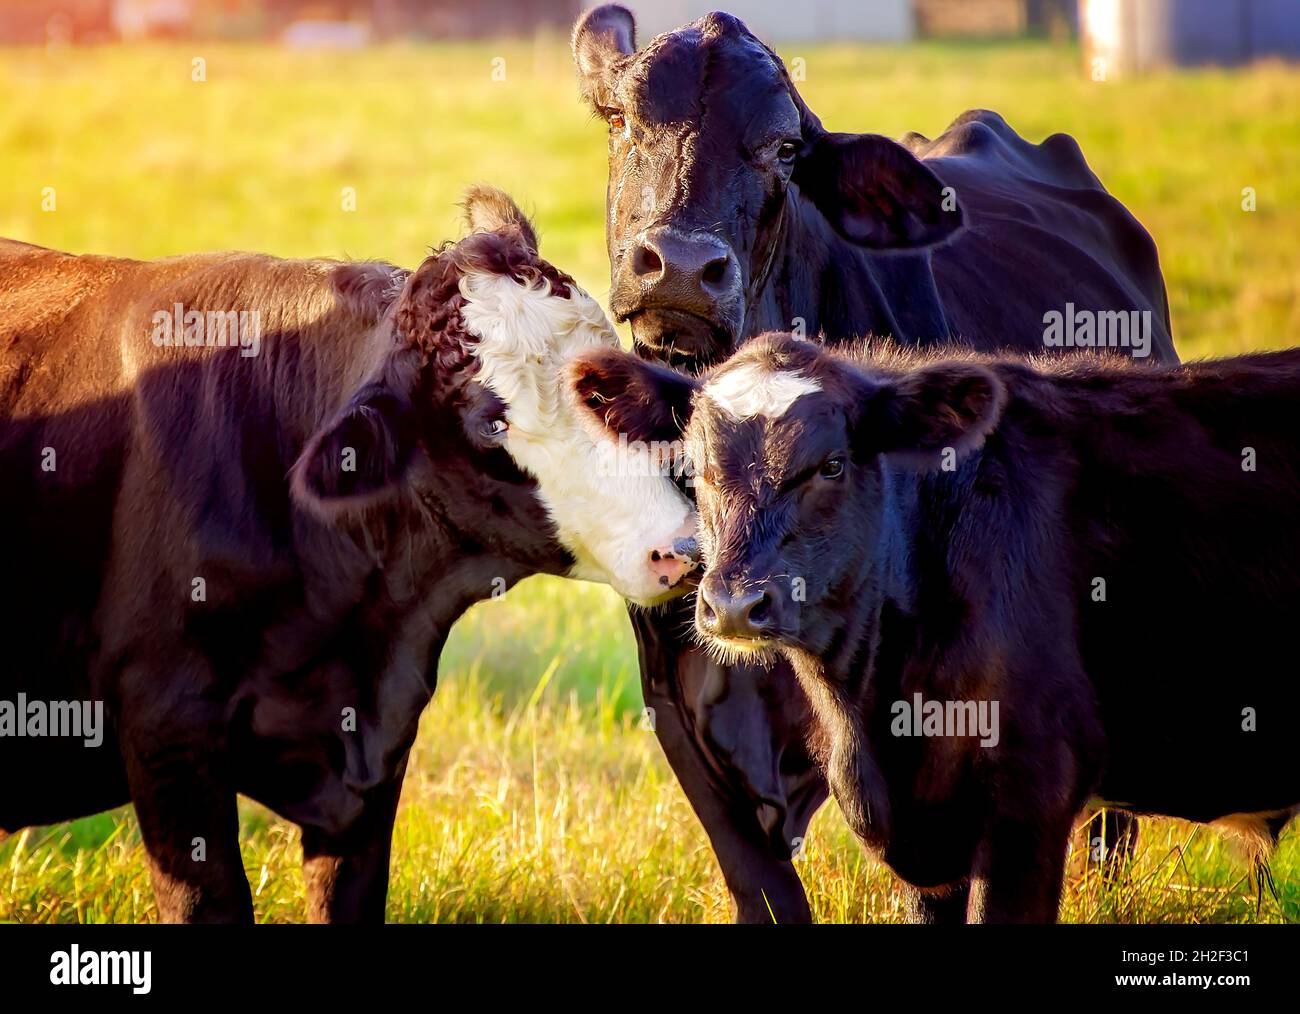 A bull and cow huddle with their calf in a field, Oct. 15, 2021, in Grand Bay, Alabama. There are approximately 1.3 million cattle in Alabama. Stock Photo